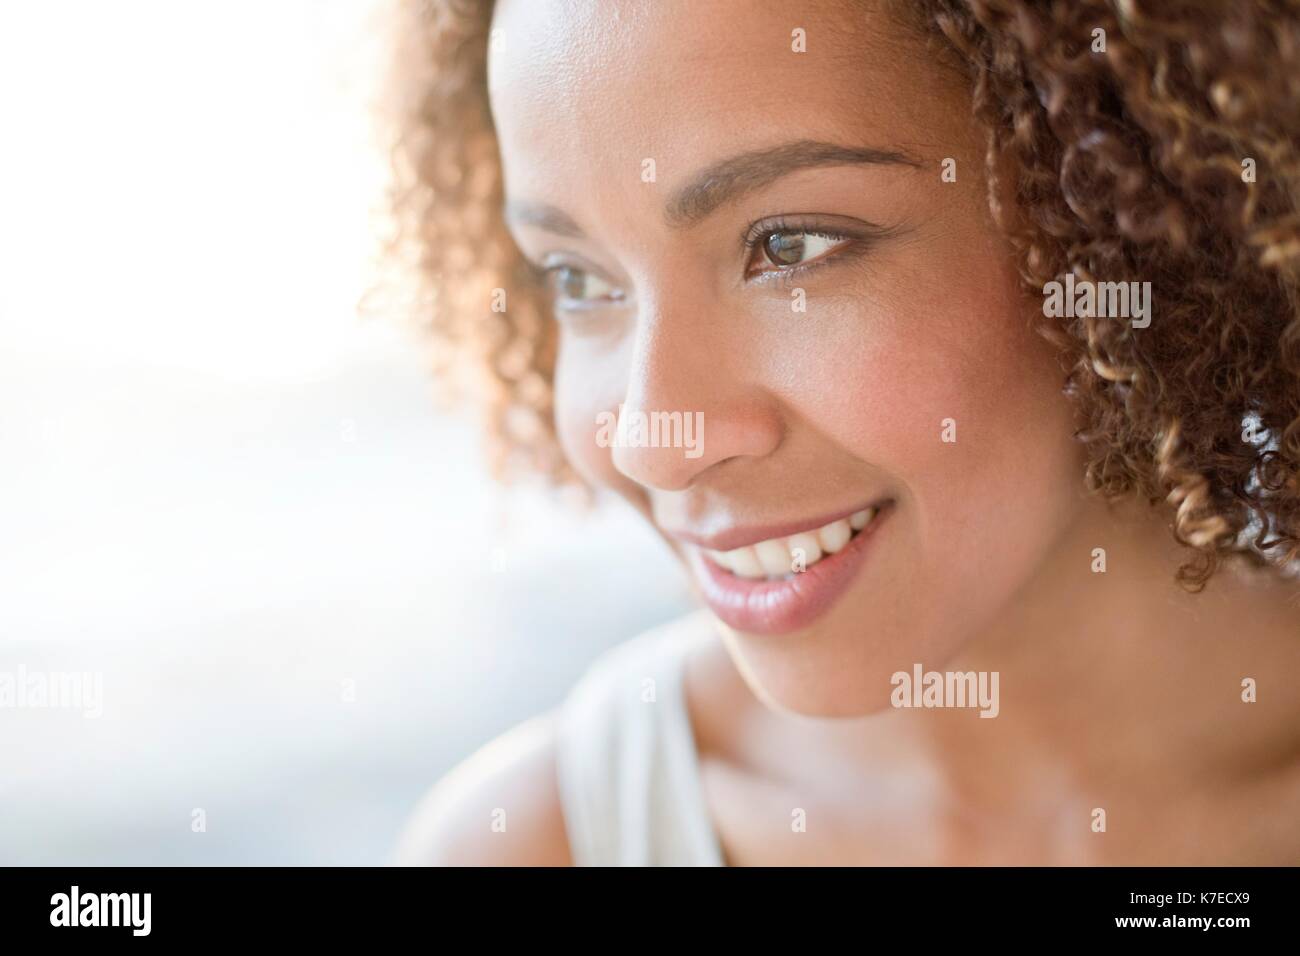 Portrait of mid adult woman smiling. Stock Photo